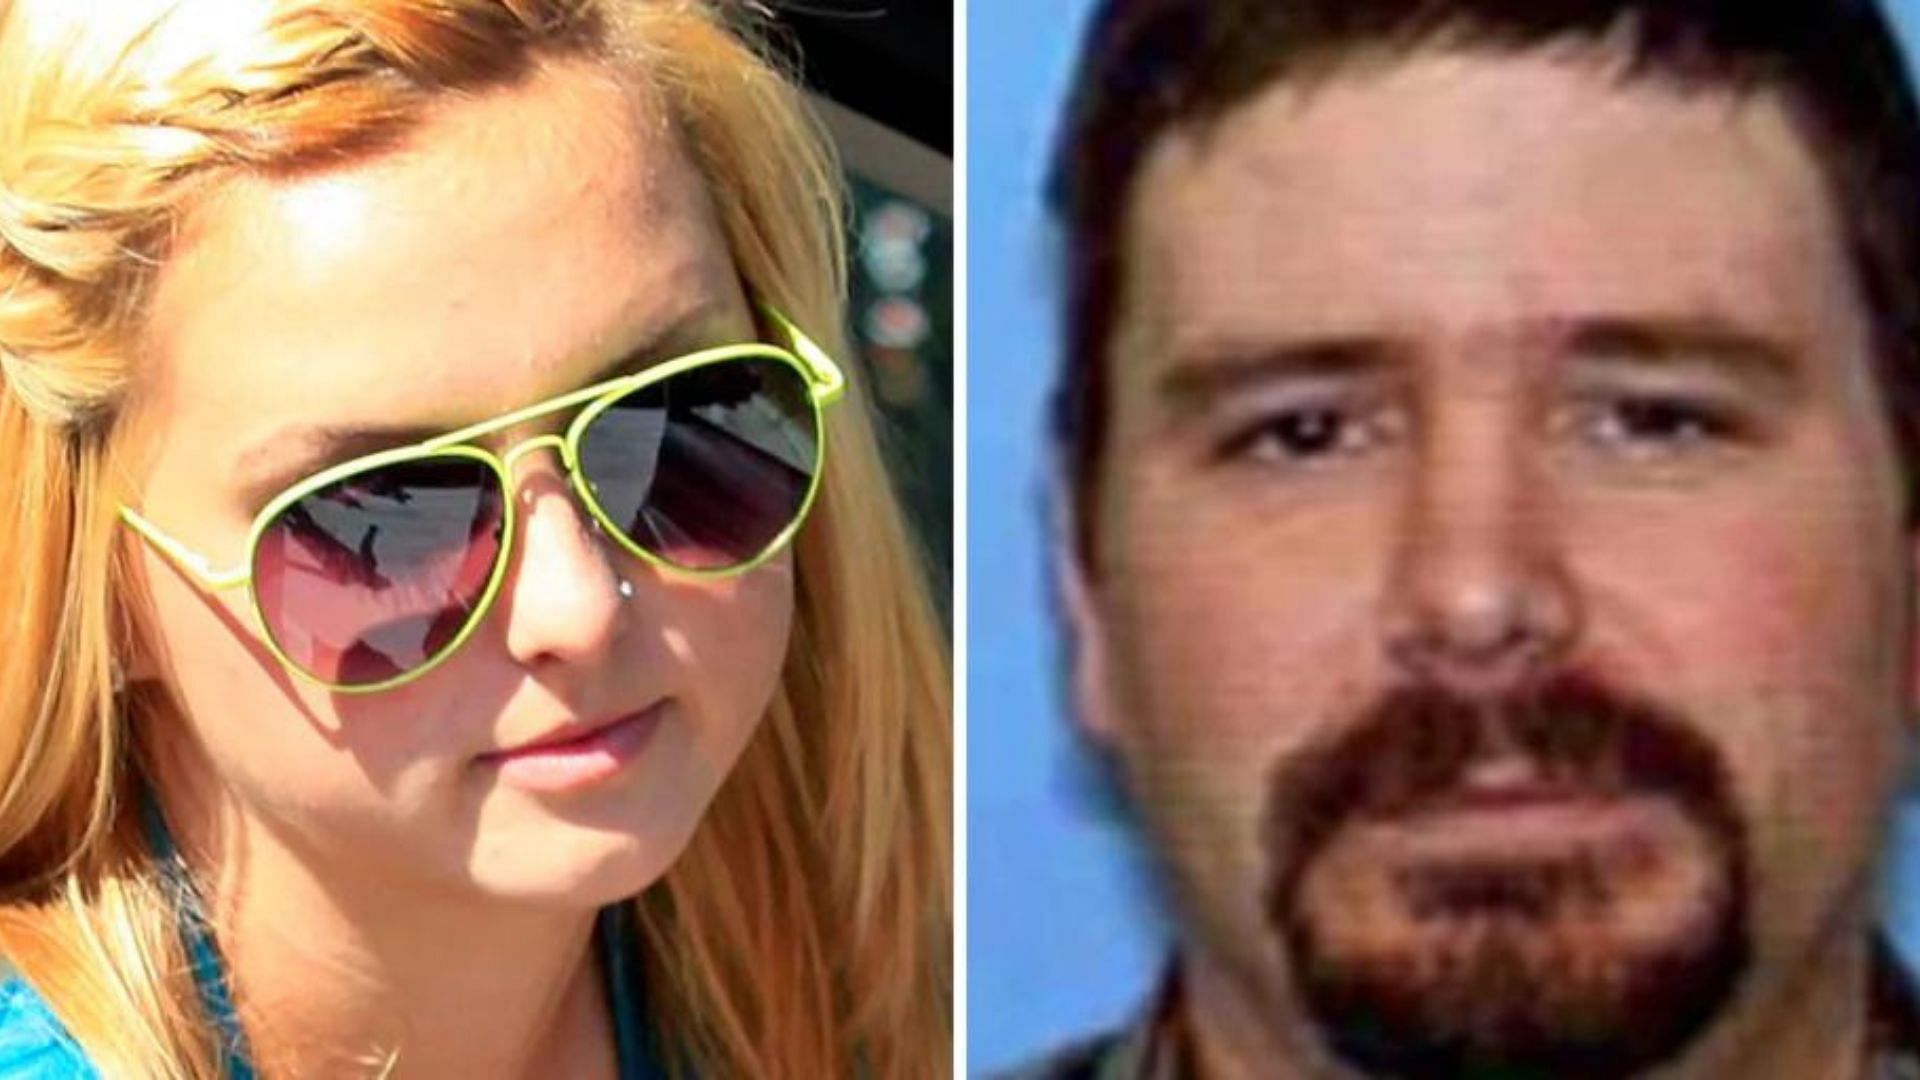 Hannah Anderson was kidnapped by a close family friend, James DiMaggio, whom she referred to as &quot;Uncle Jim&quot; (Image via NBC)